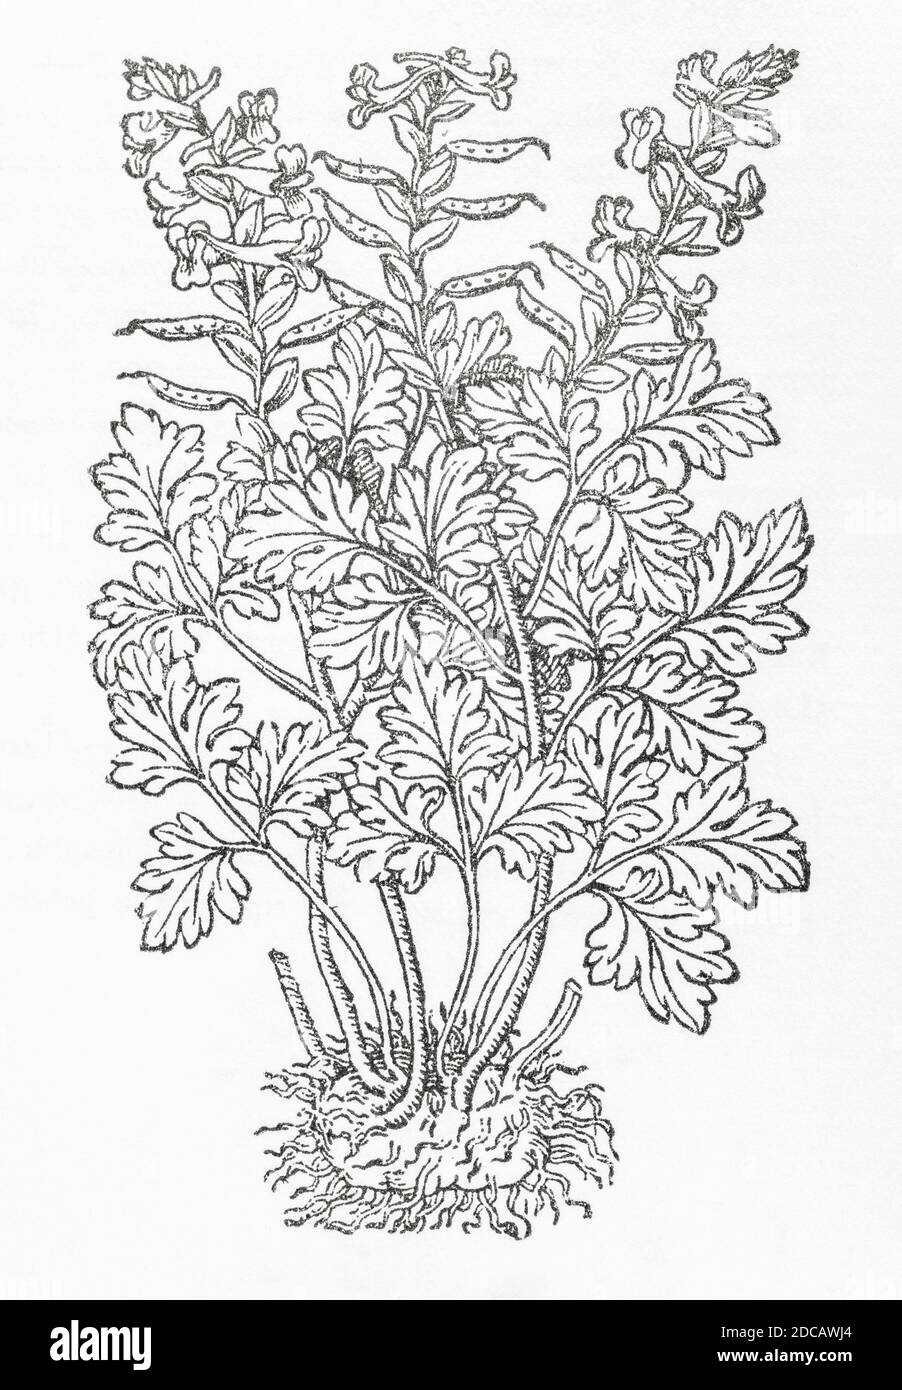 Hollow Root / Corydalis cava woodcut from Gerarde's Herball, History of Plants. Gerard refers to it as 'Small purple Hollow roote'. P931 Stock Photo